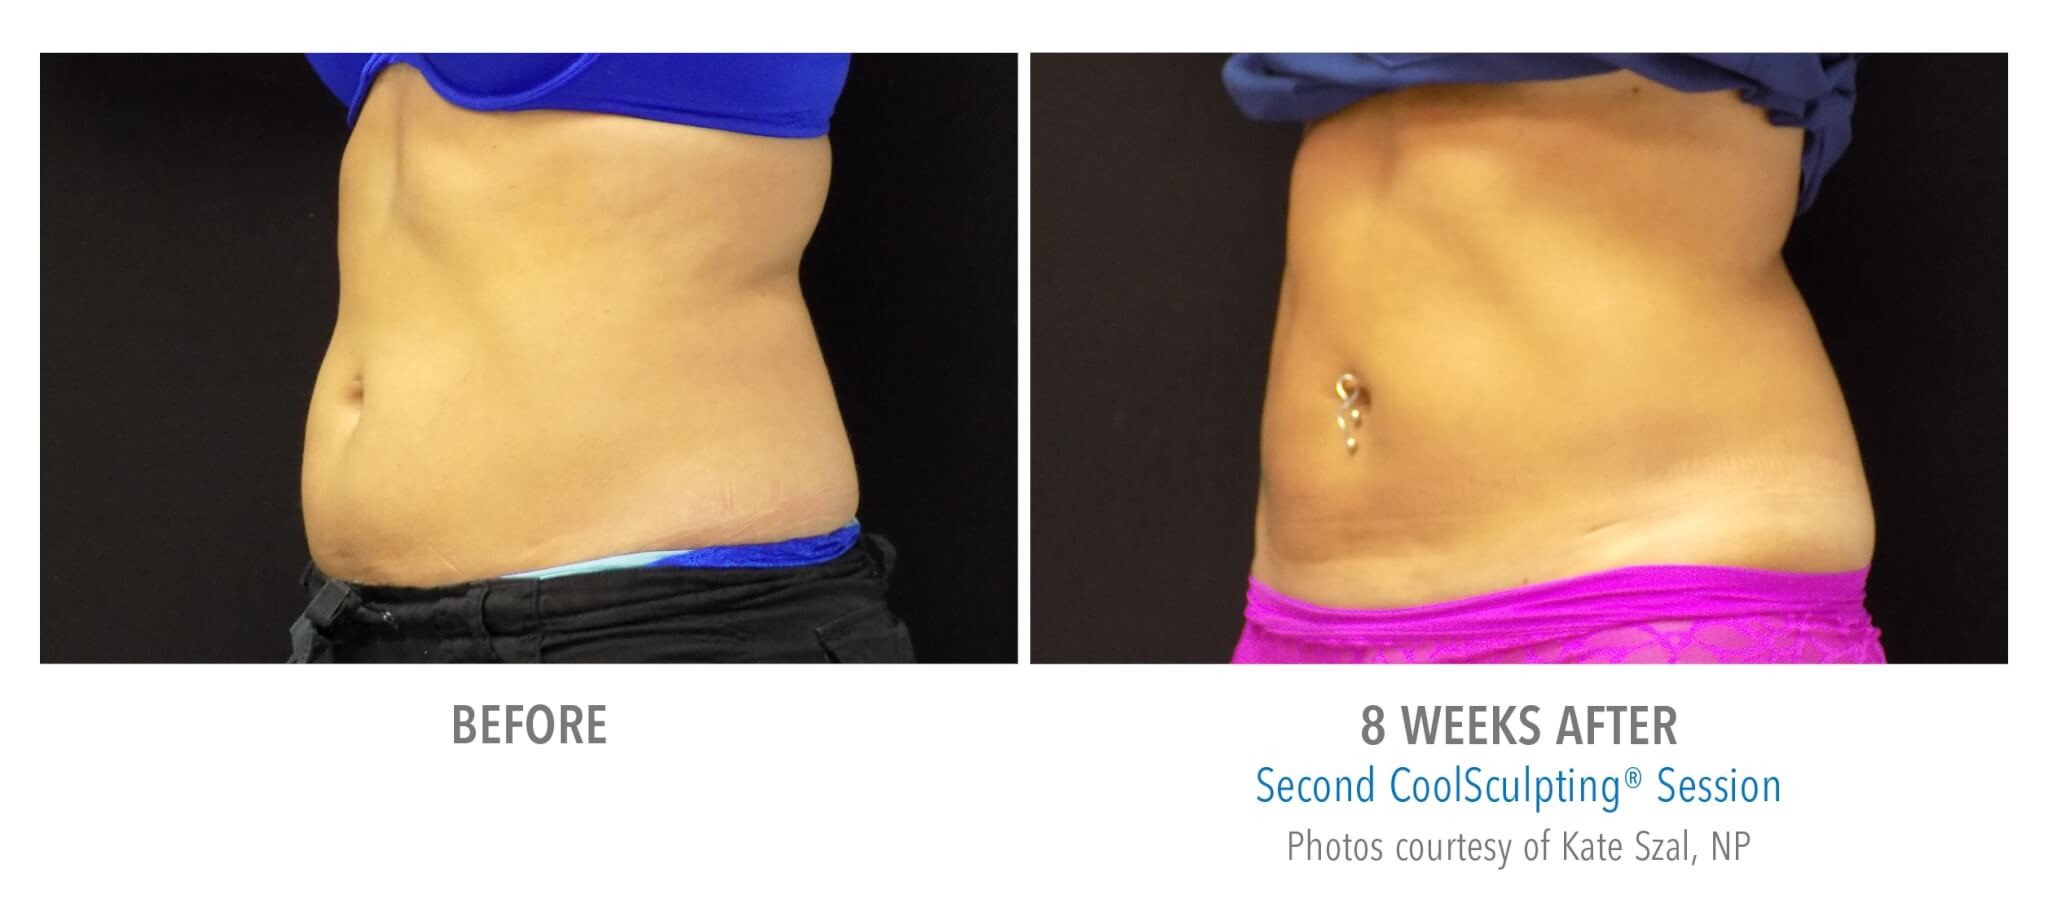 abdomen-angle-2 coolsculpting patient before and after